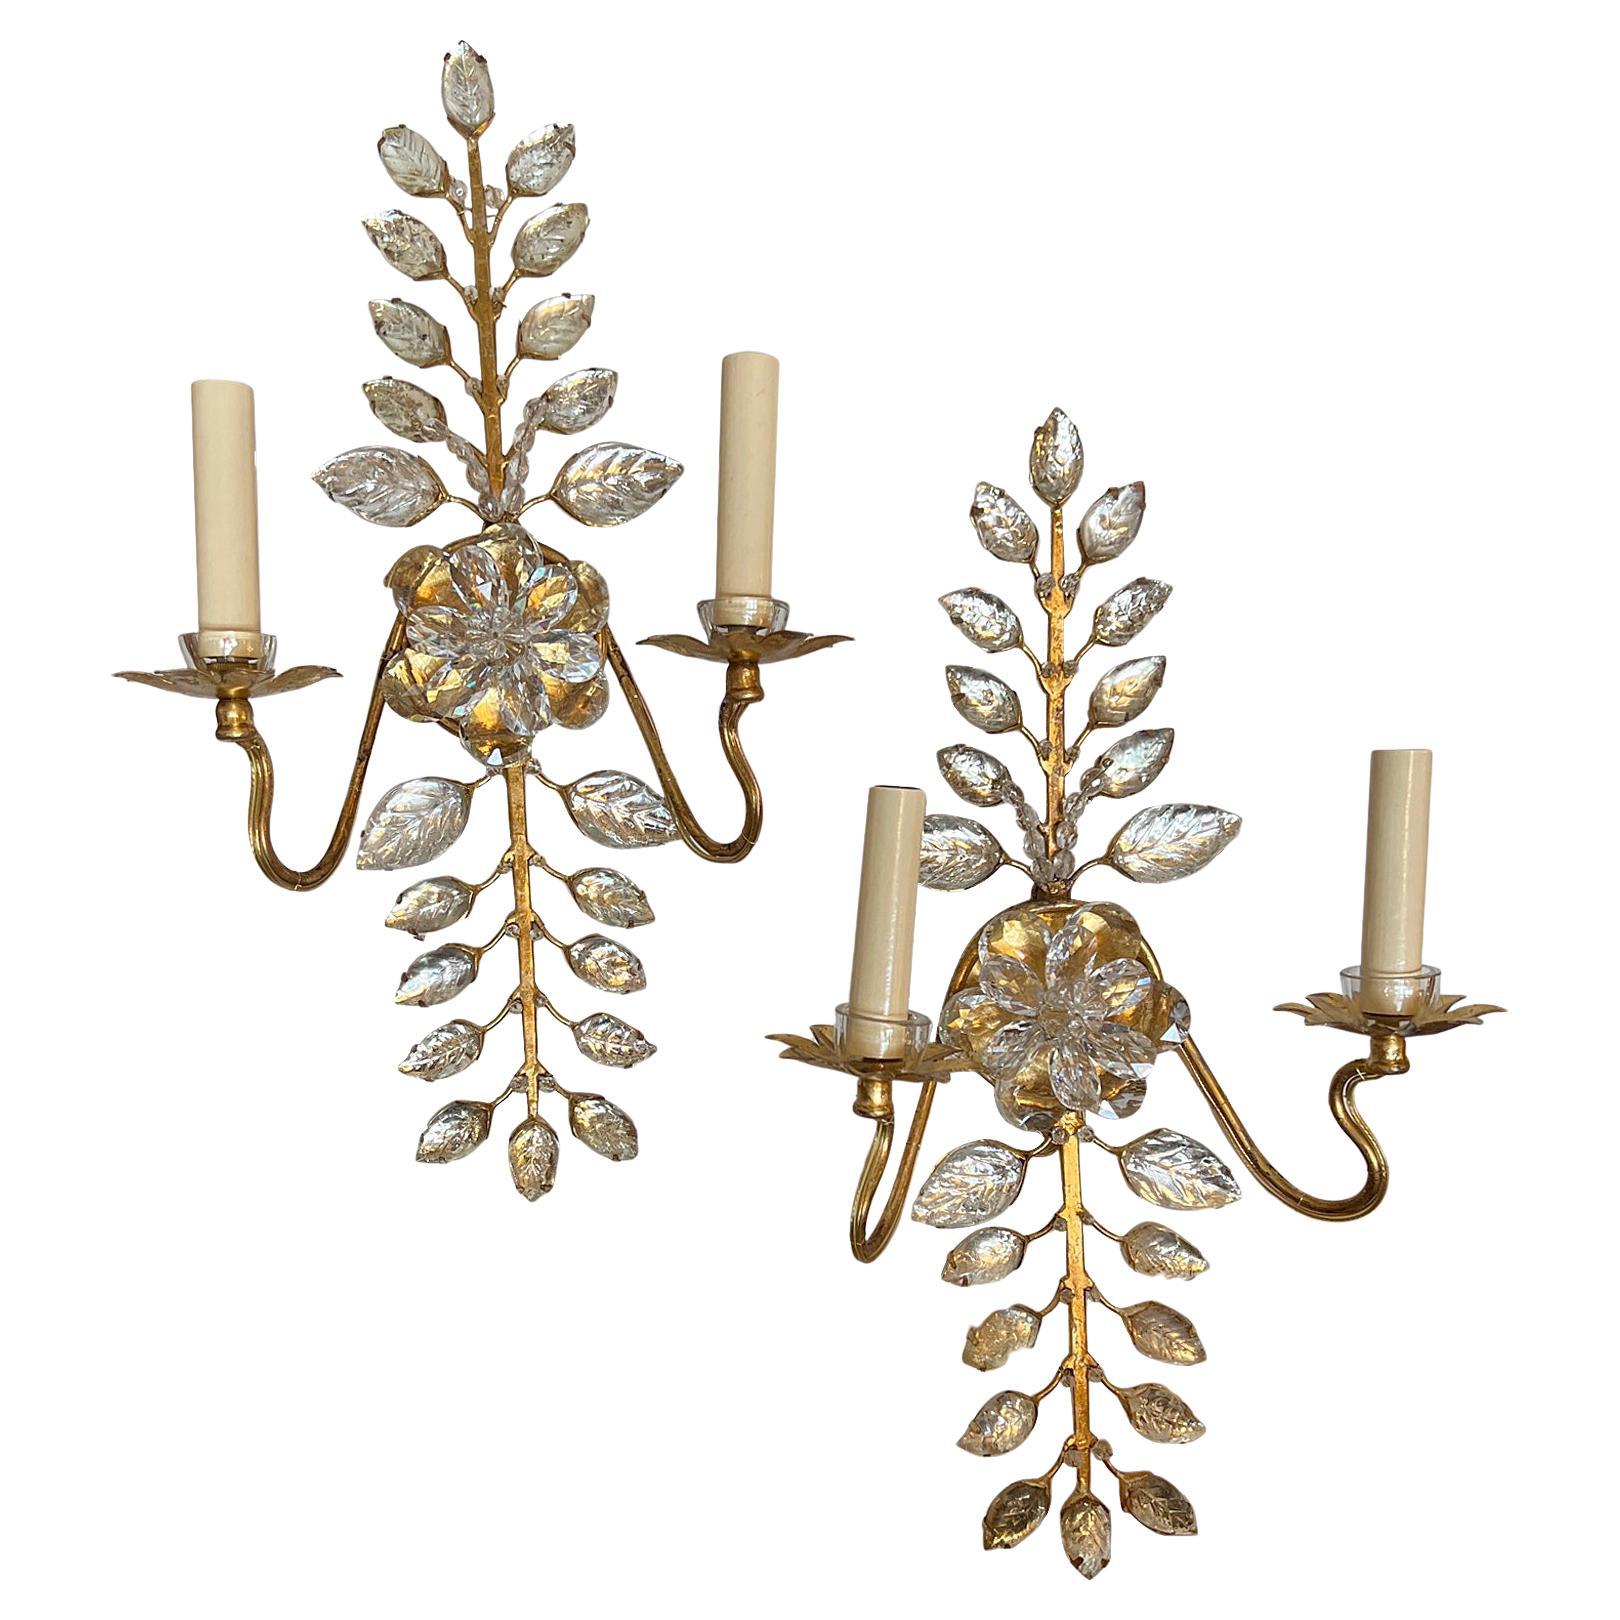 Set of Gilt Metal Sconces with Molded Glass Leaves. Sold in Pairs